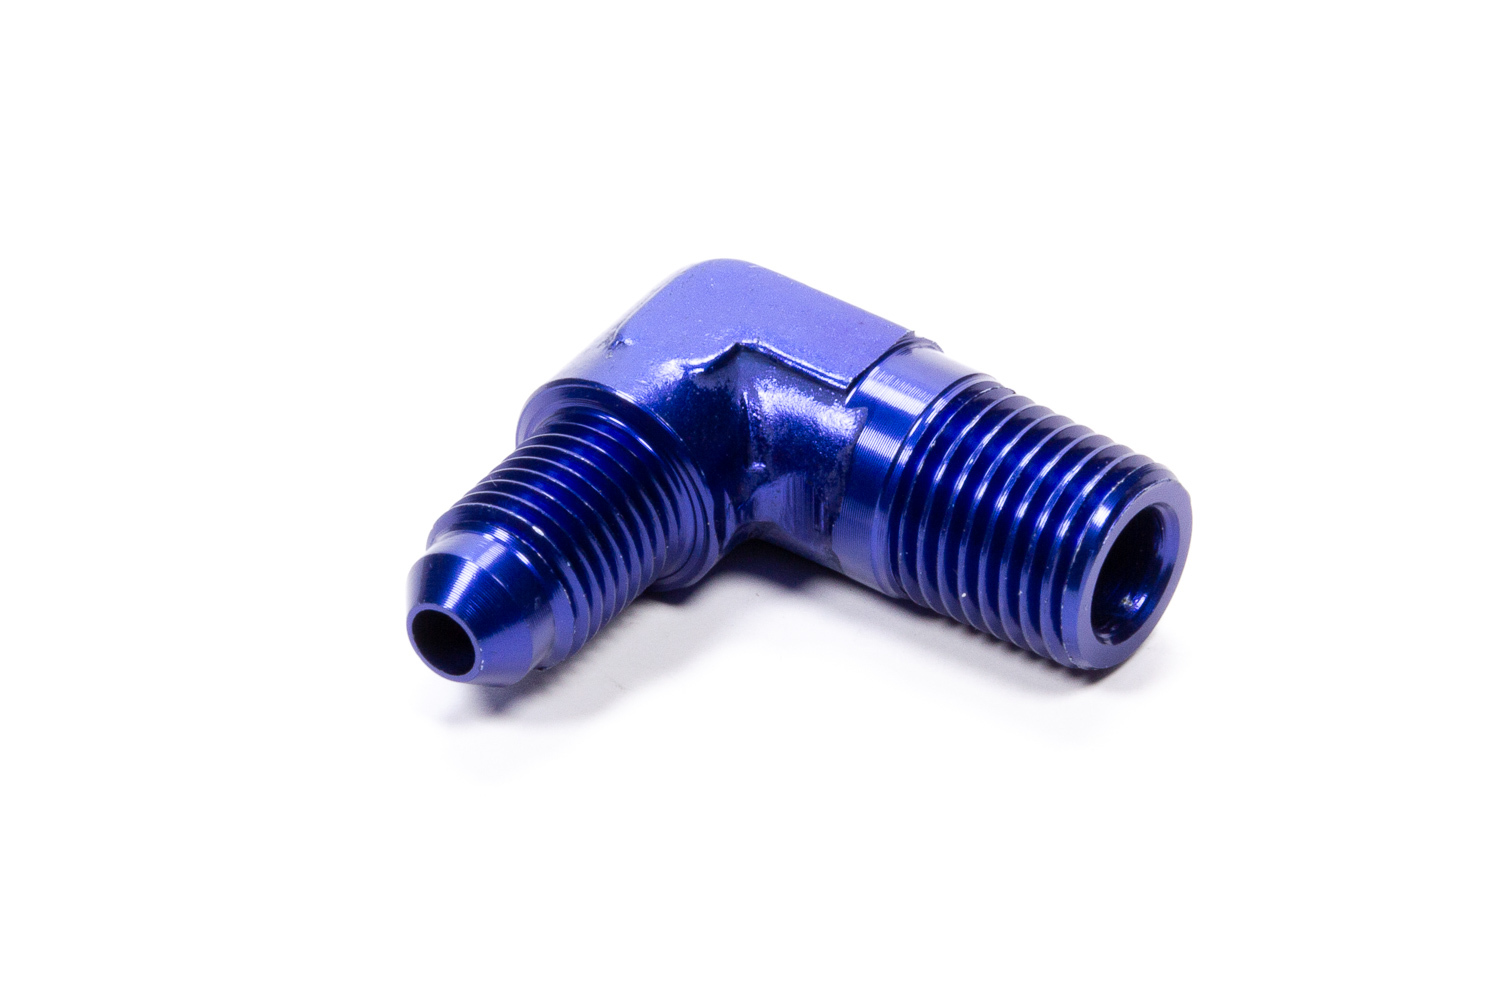 Fragola 482244 Fitting, Adapter, 90 Degree, 4 AN Male to 1/4 in NPT Male, Aluminum, Blue Anodized, Each